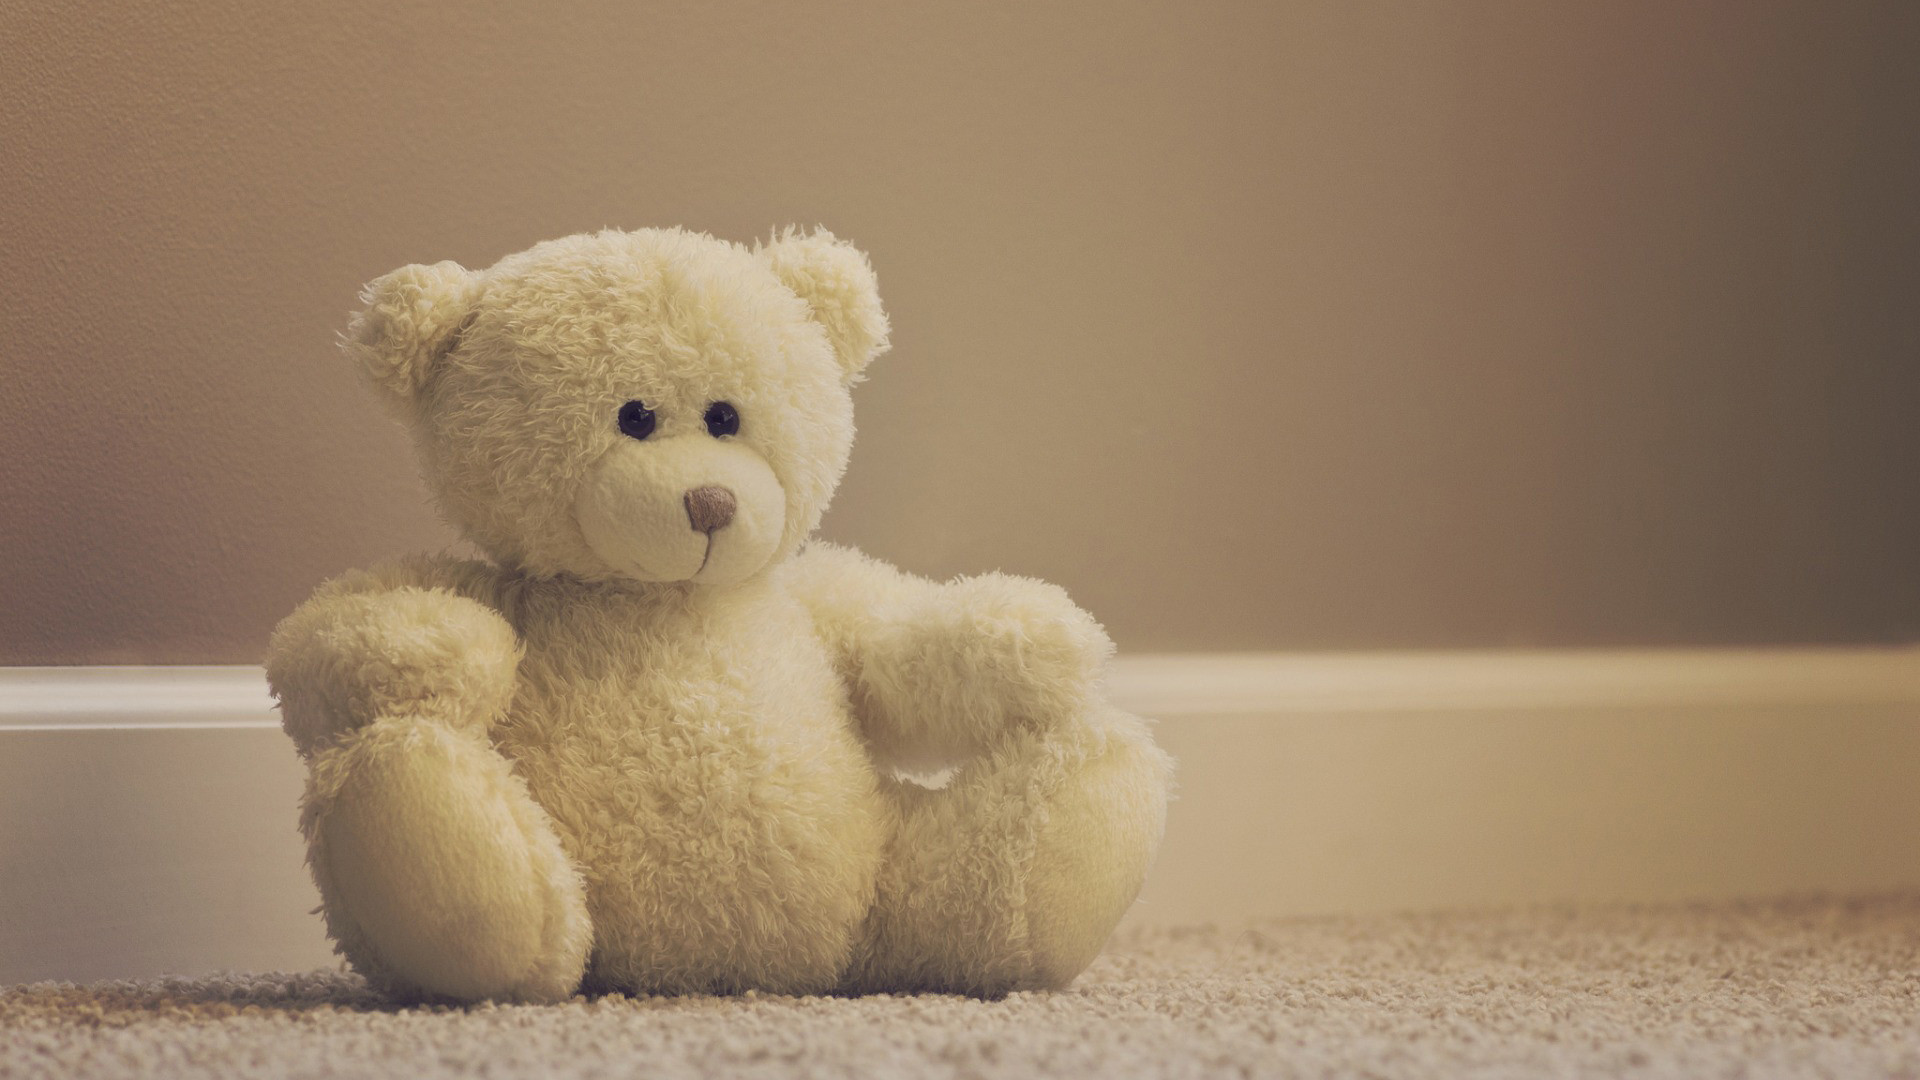 Cute Teddy Bears Wallpapers (59+ images)